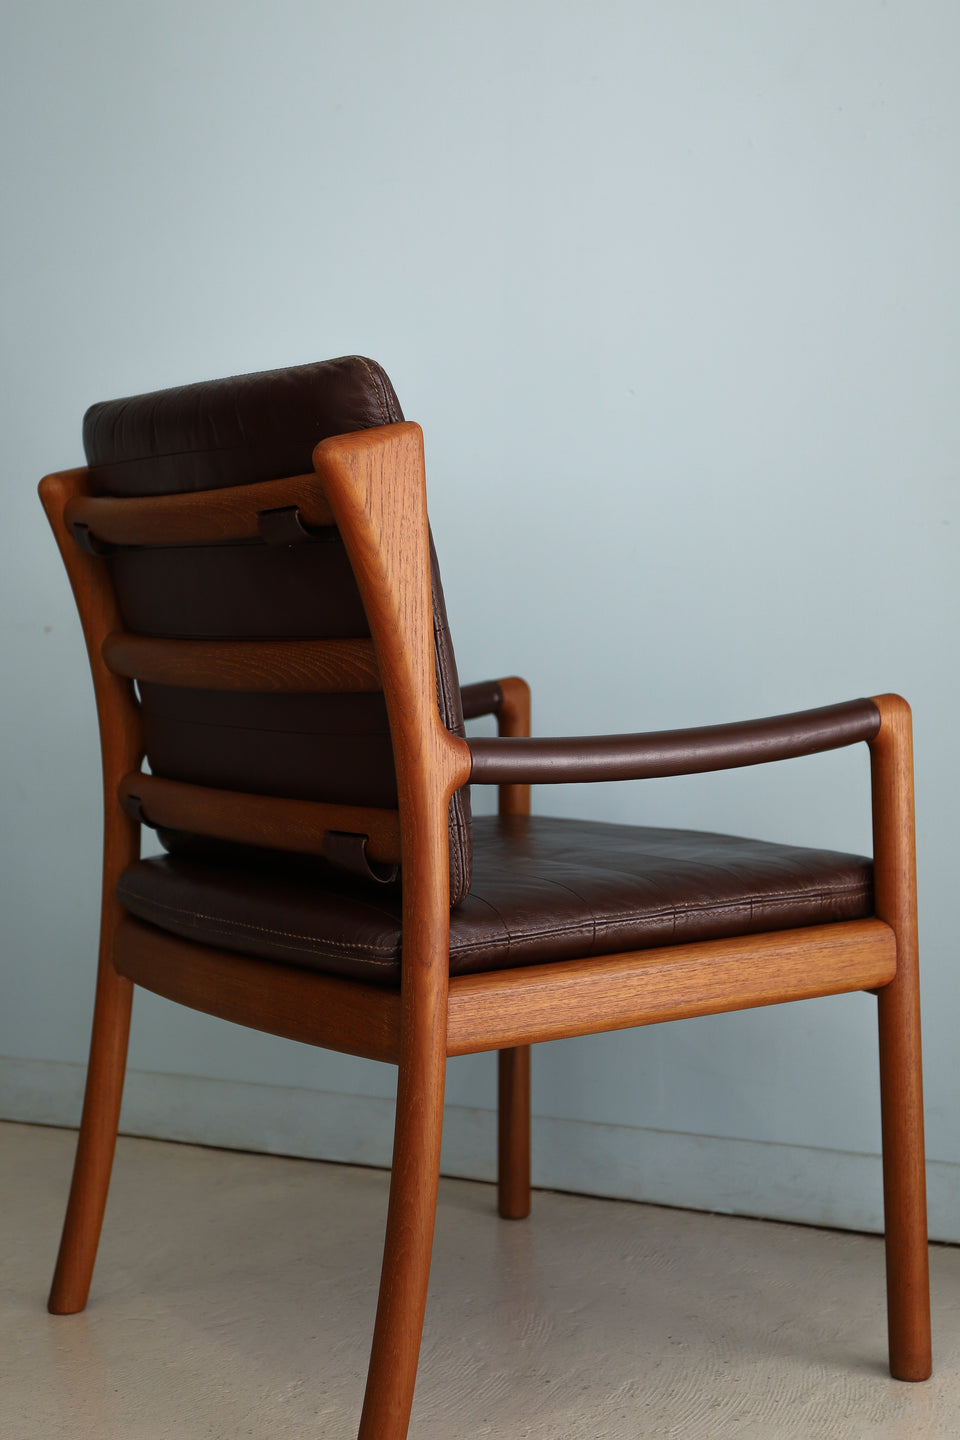 Japanese Vintage HITA CRAFTS Arm Chair Teakwood/日田工芸 アームチェア 椅子 チーク材 ジャパンヴィンテージ